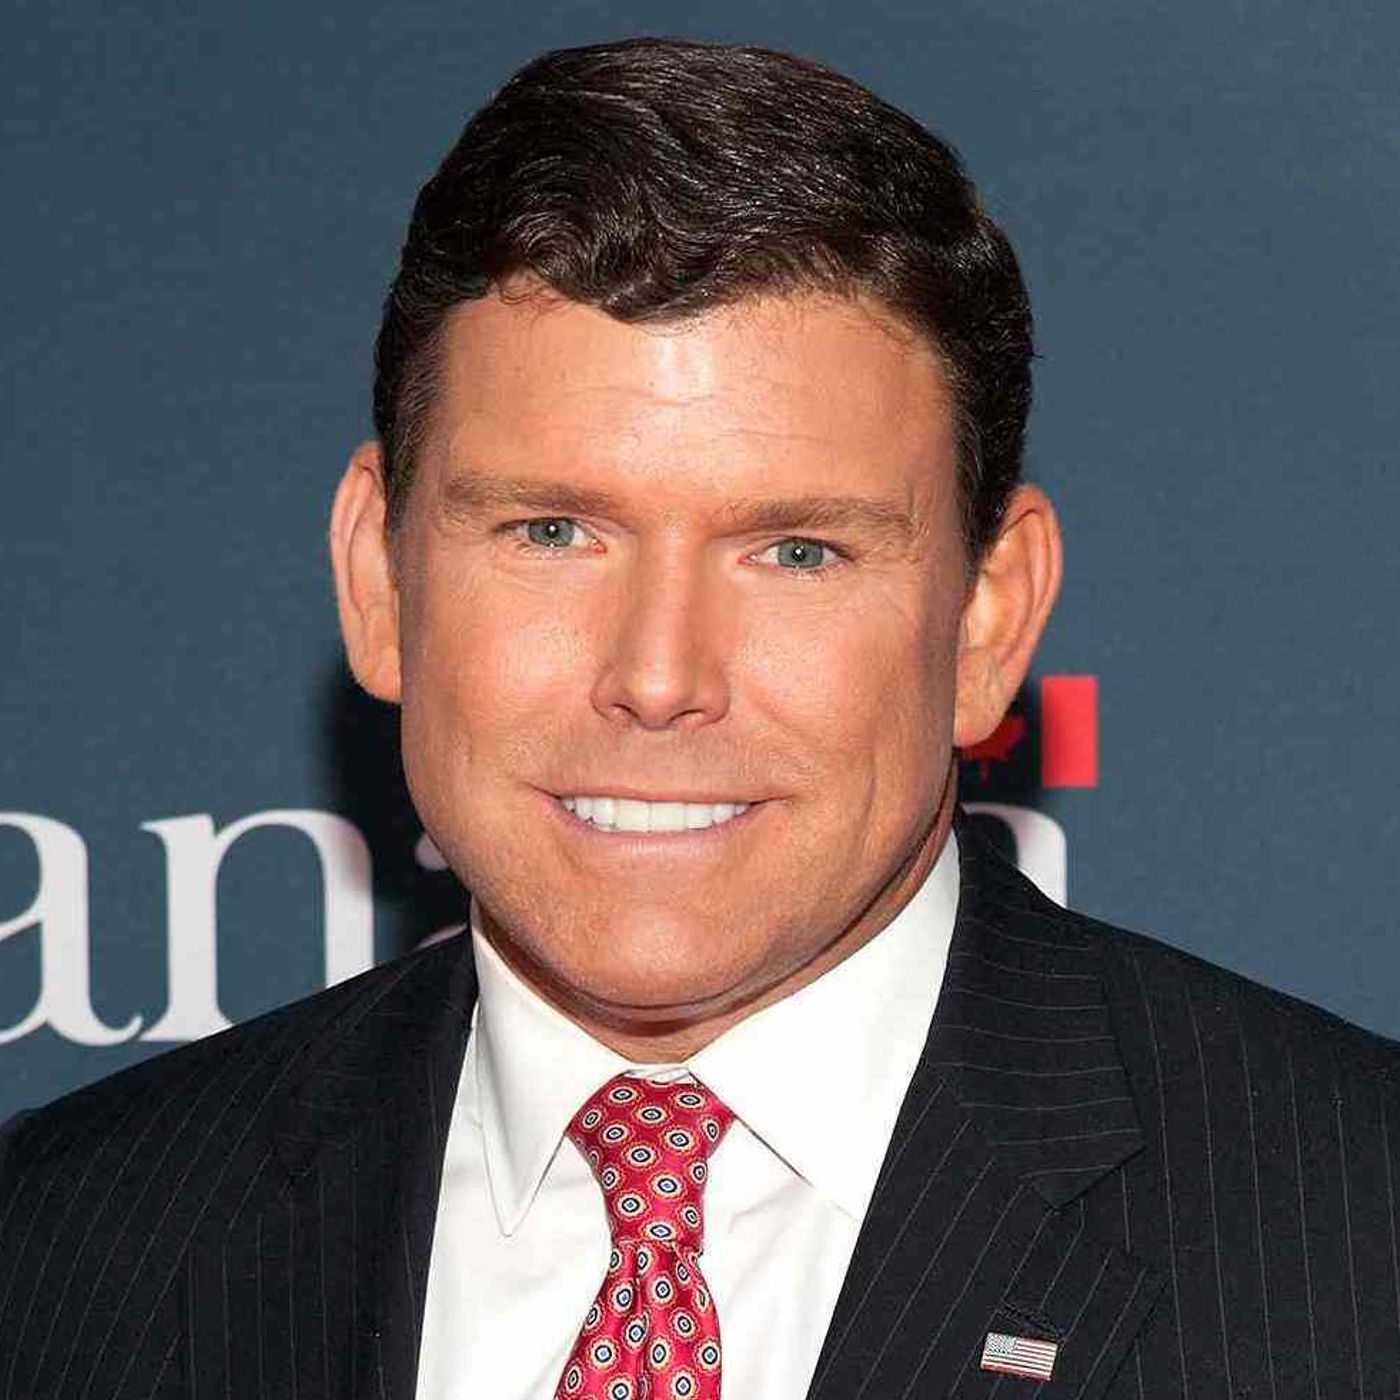 Bret Baier - Fox News Anchor, Author ”To Rescue the Constitution - George Washington”